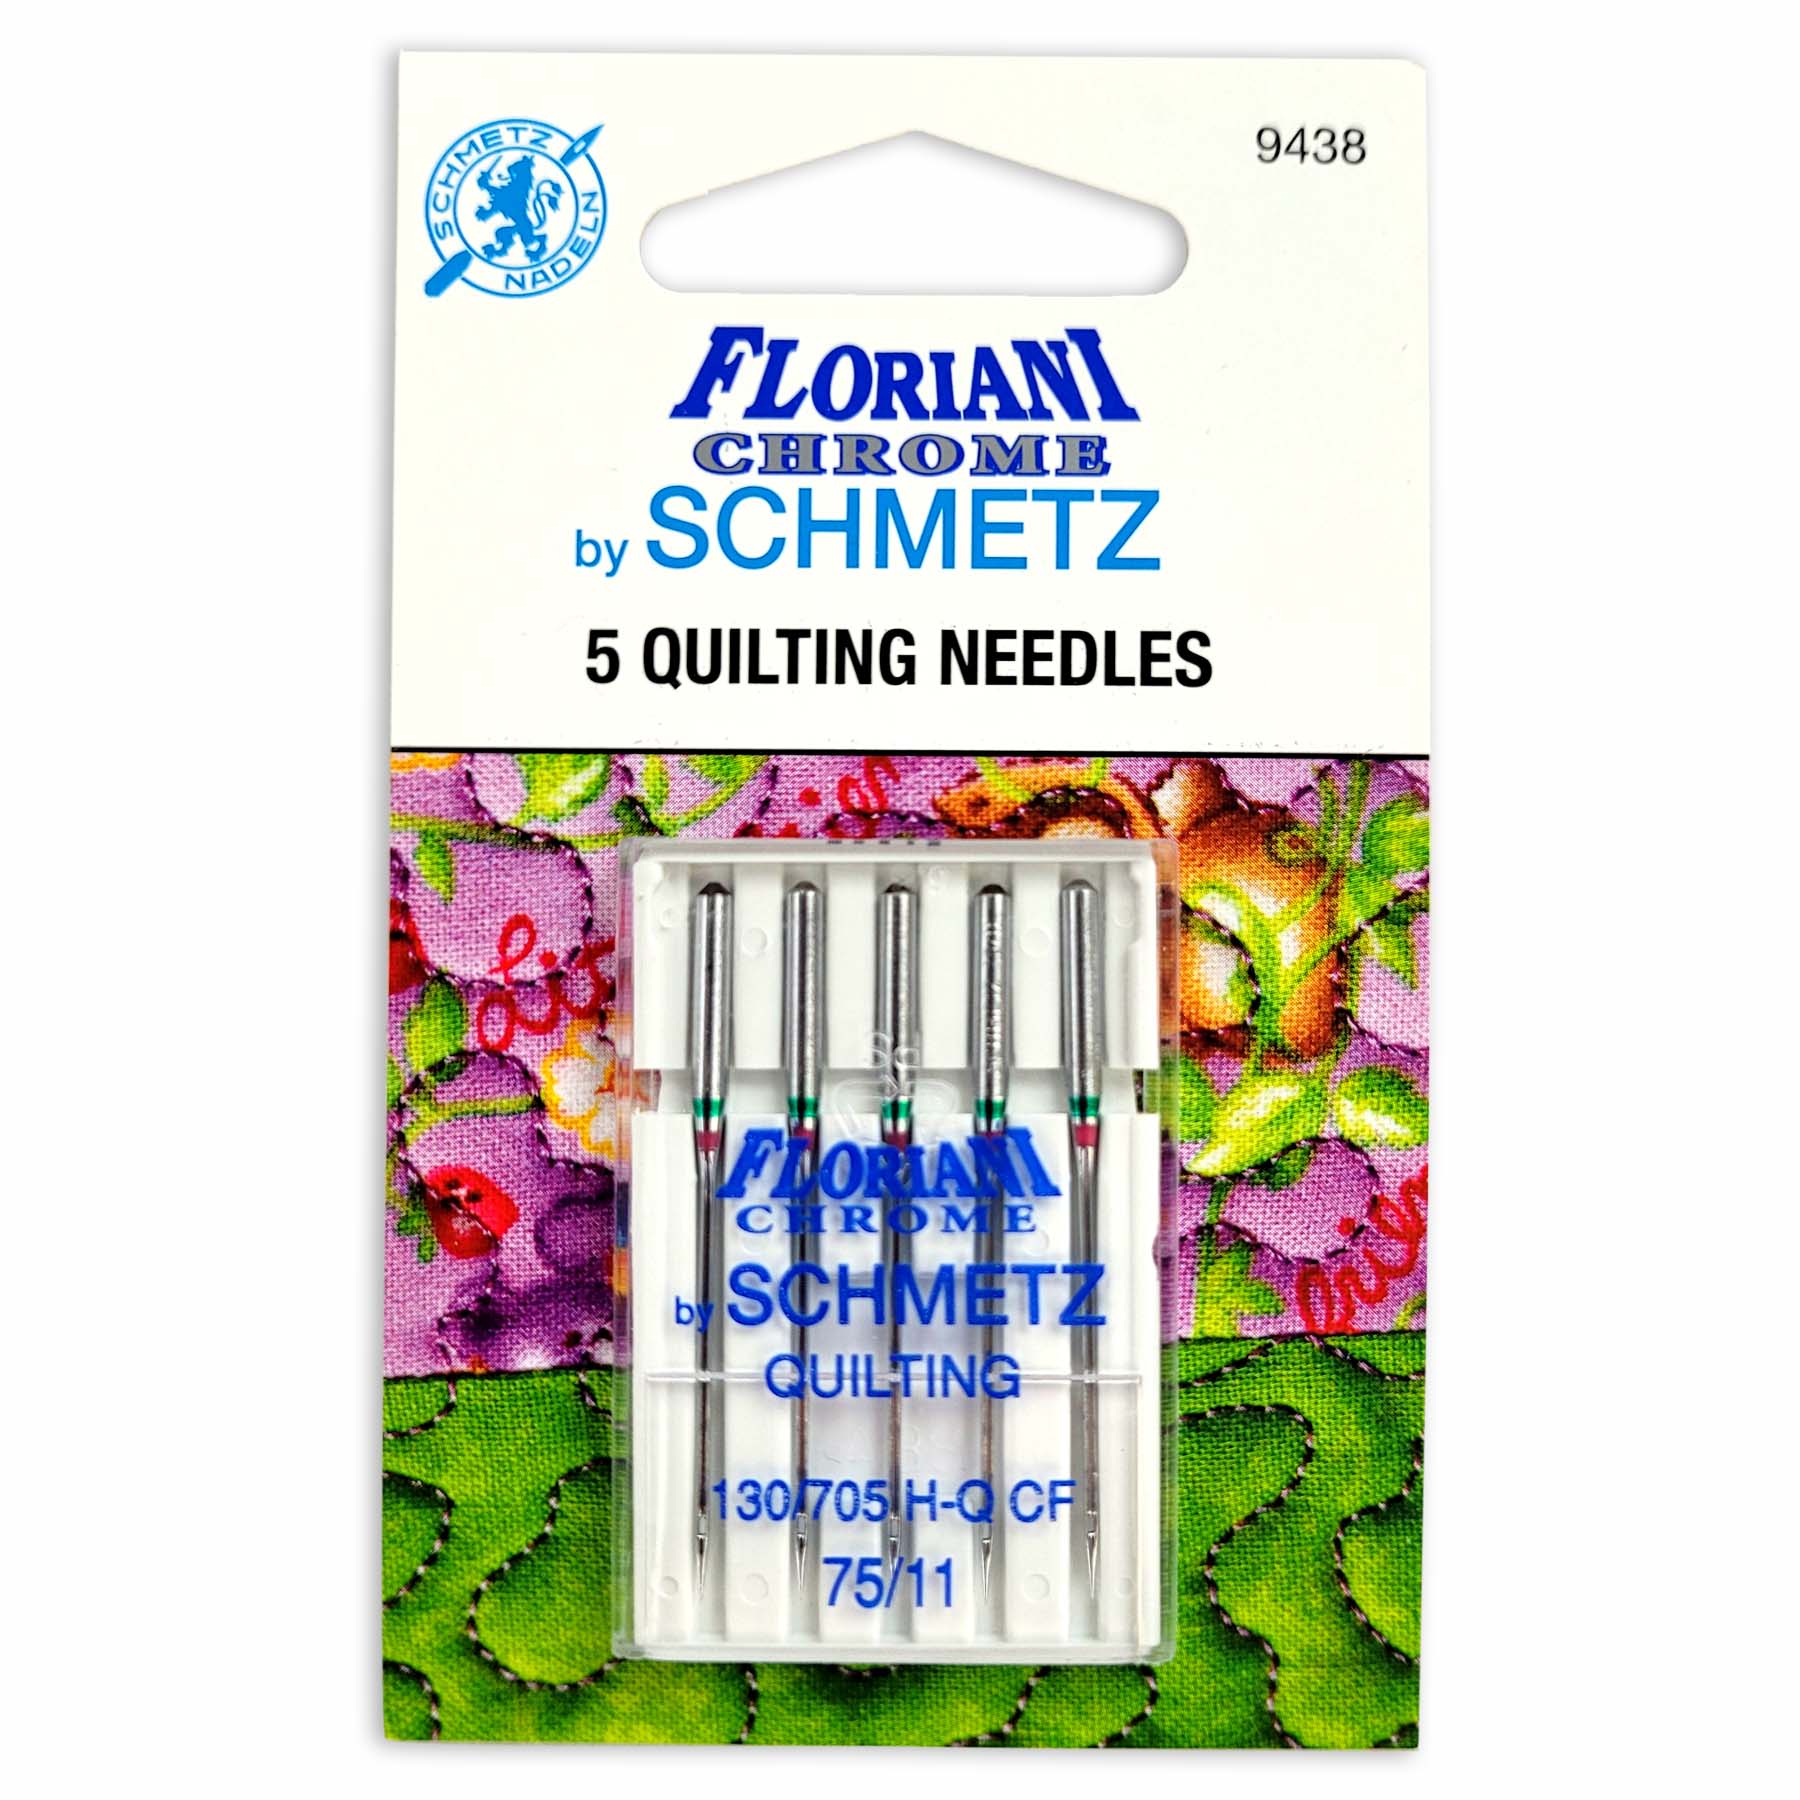 Needles, Quilting - Floriani Chrome by Schmetz 5ct